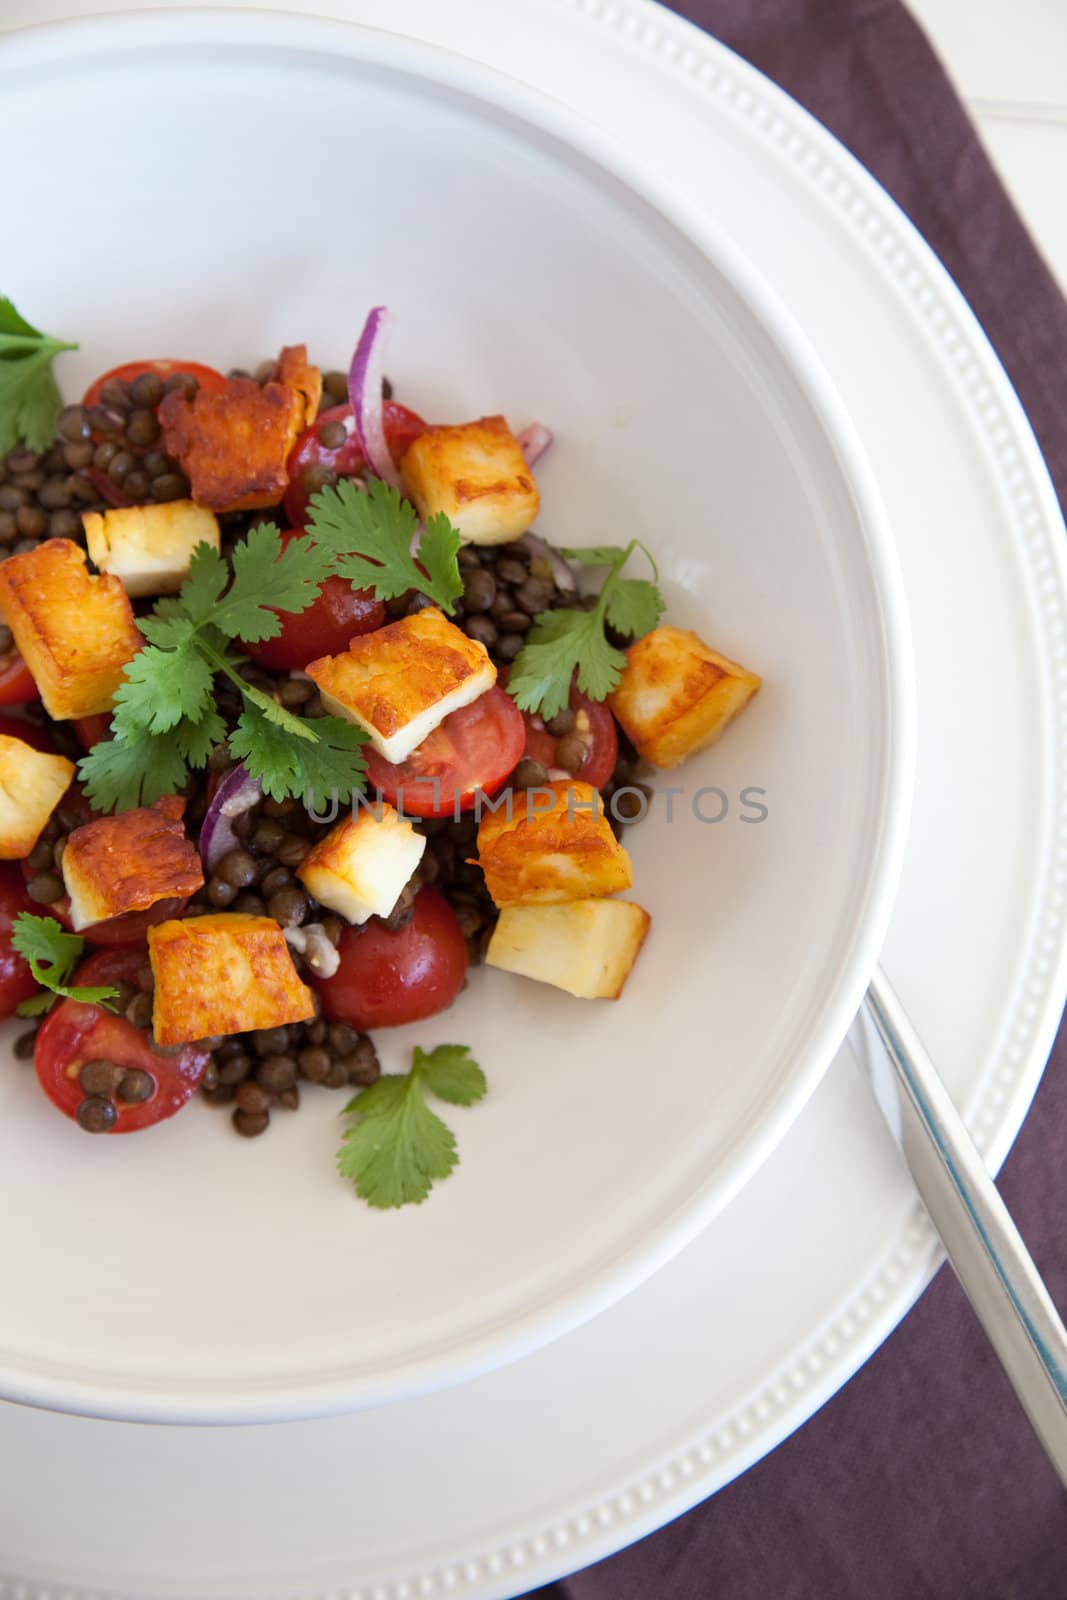 Delicious healthy salad with haloumi, tomatoes, lentils and cilantro